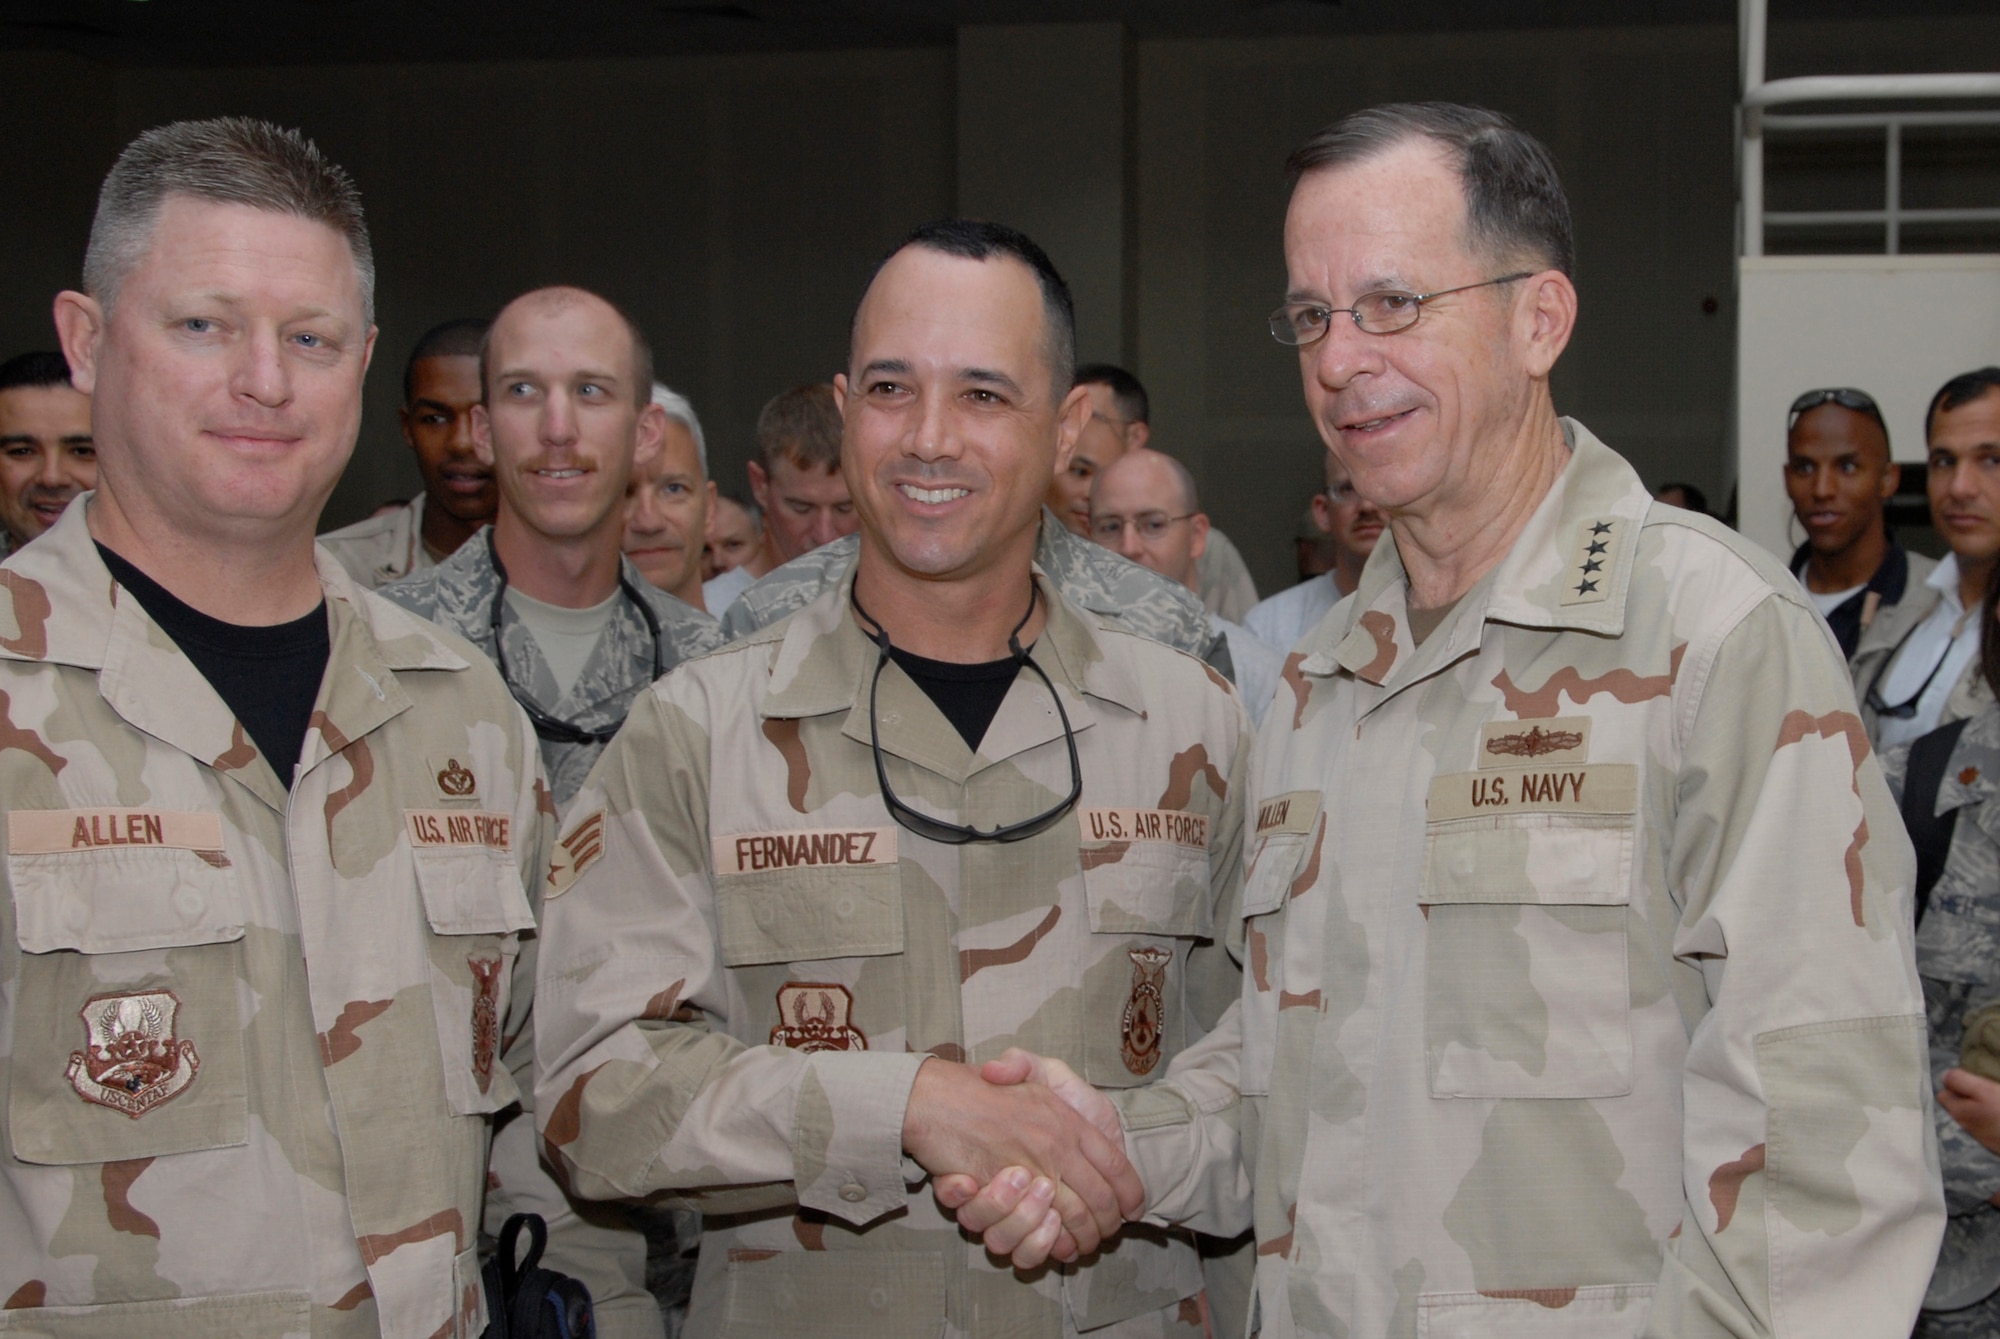 SOUTHWEST ASIA -- Navy Admiral Mike Mullen, chairman of the Joint Chiefs of Staff, poses for a photo with Senior Airman Eric Fernandez and Senior Master Sgt. Todd Allen, fire fighters deployed to the 386th Expeditionary Civil Engineer Squadron, July 7, 2008, at the theatre on an air base in the Persian Gulf Region. Admiral Mullen is on a seven-day, summer troop visit and United Service Organizations tour. (U.S. Air Force photo/Staff Sgt. Patrick Dixon)